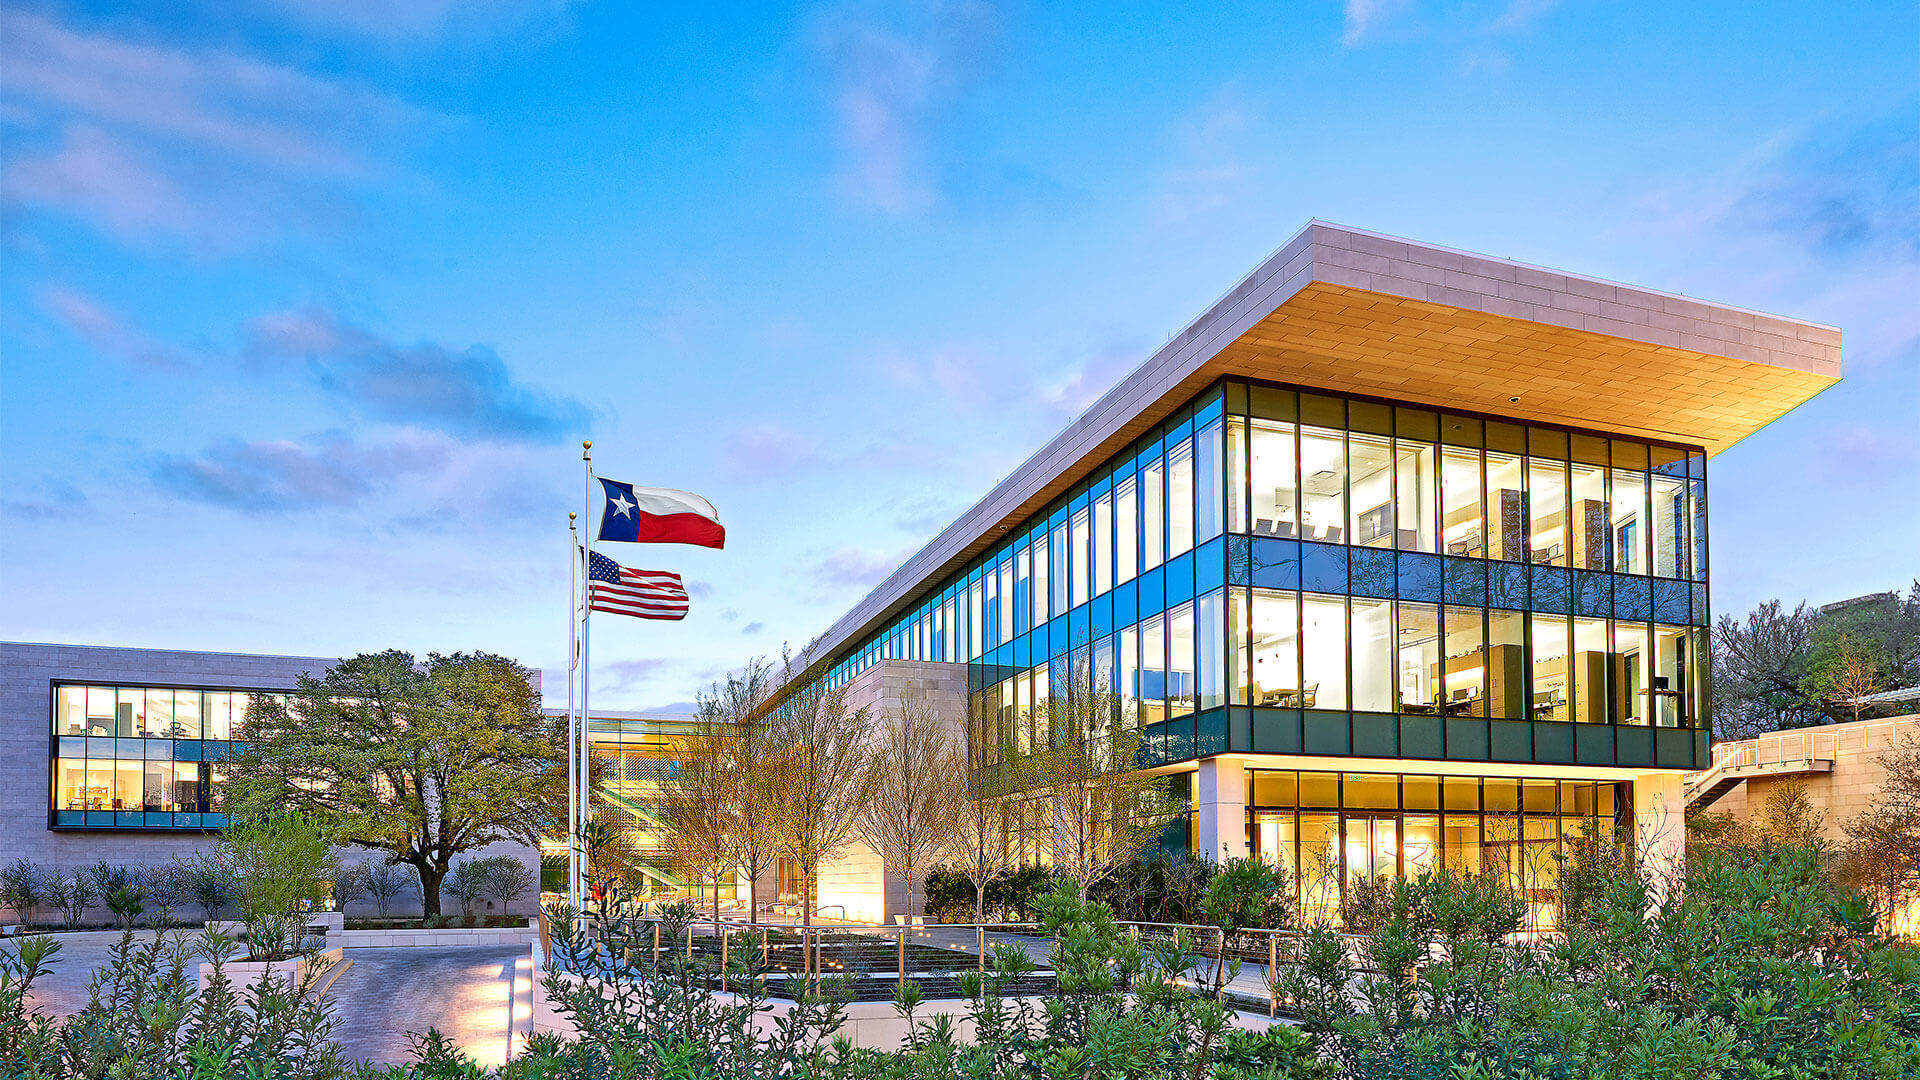 Angled sunset view of the Hillwood campus in Dallas, Texas.